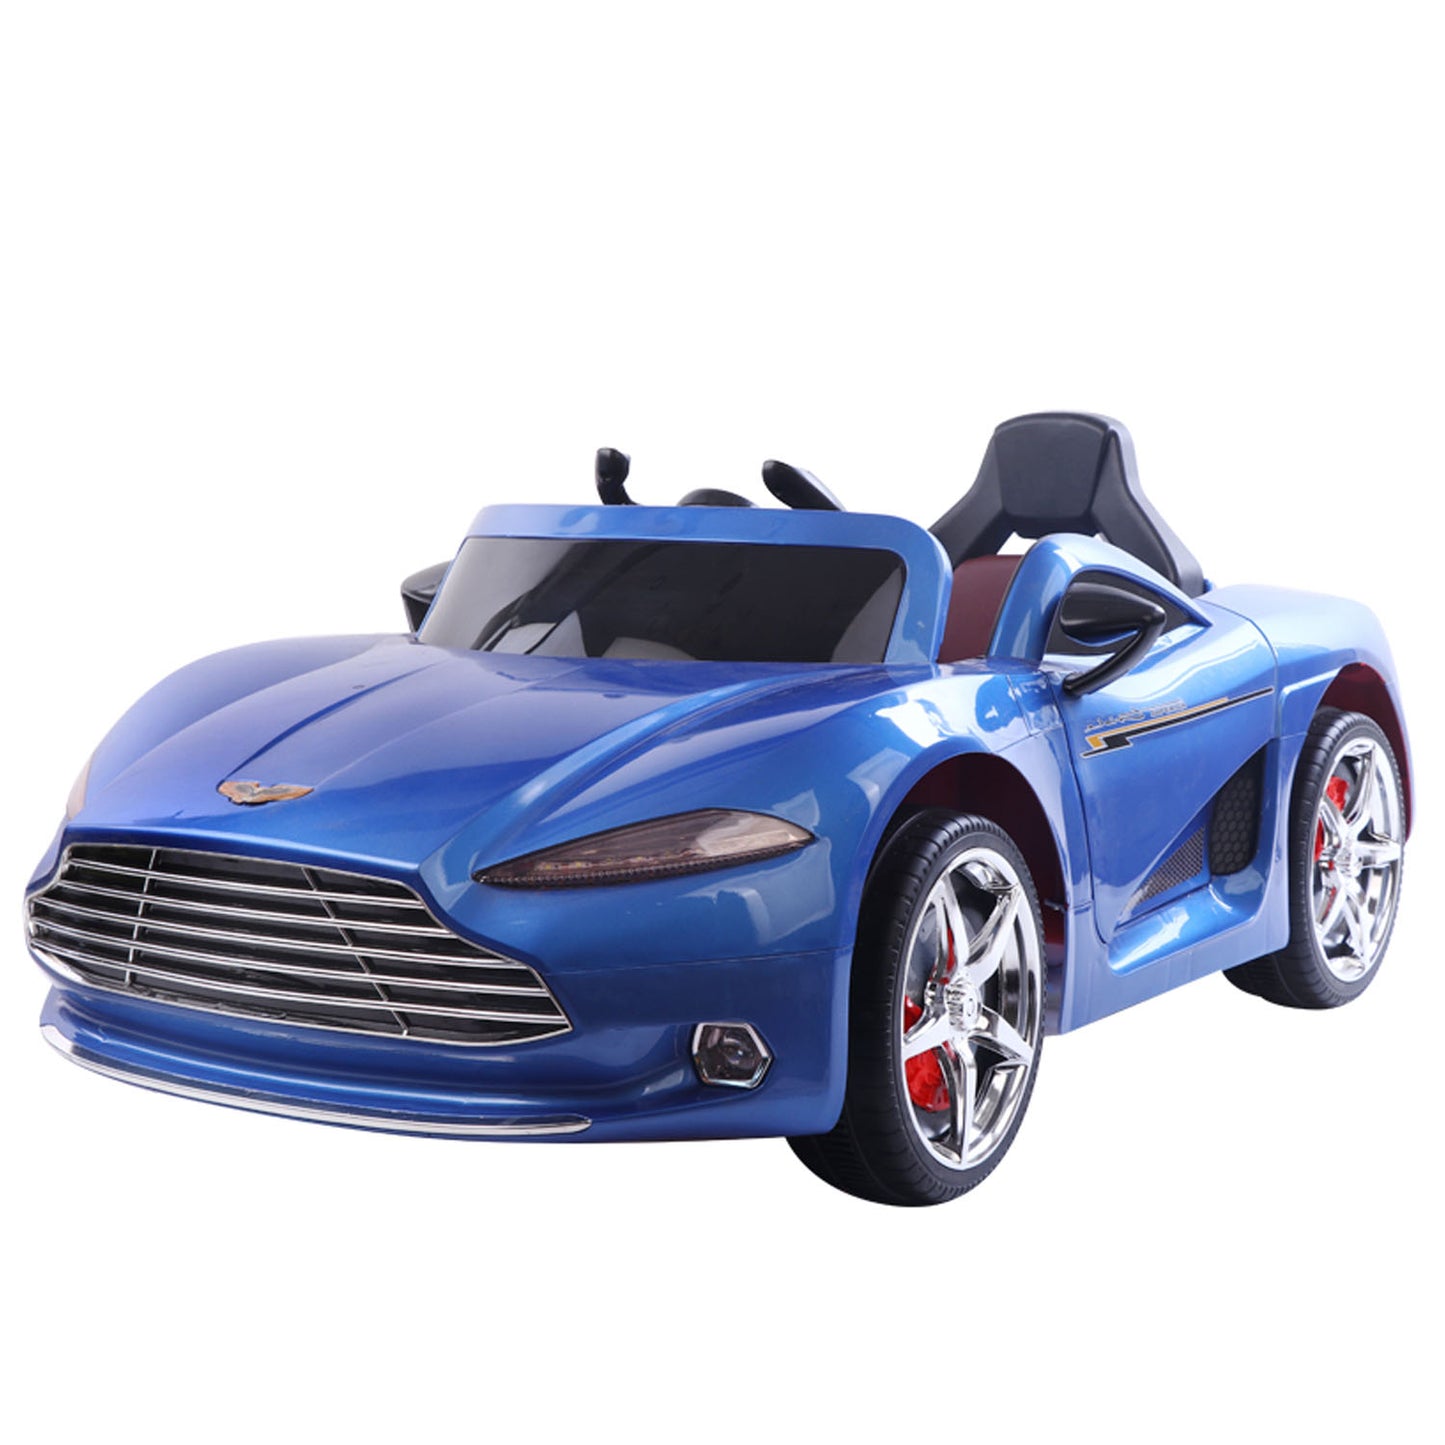 Aston Martin Kids Car | Rechargeable Battery Operated Ride on car for Kids | Leather seat